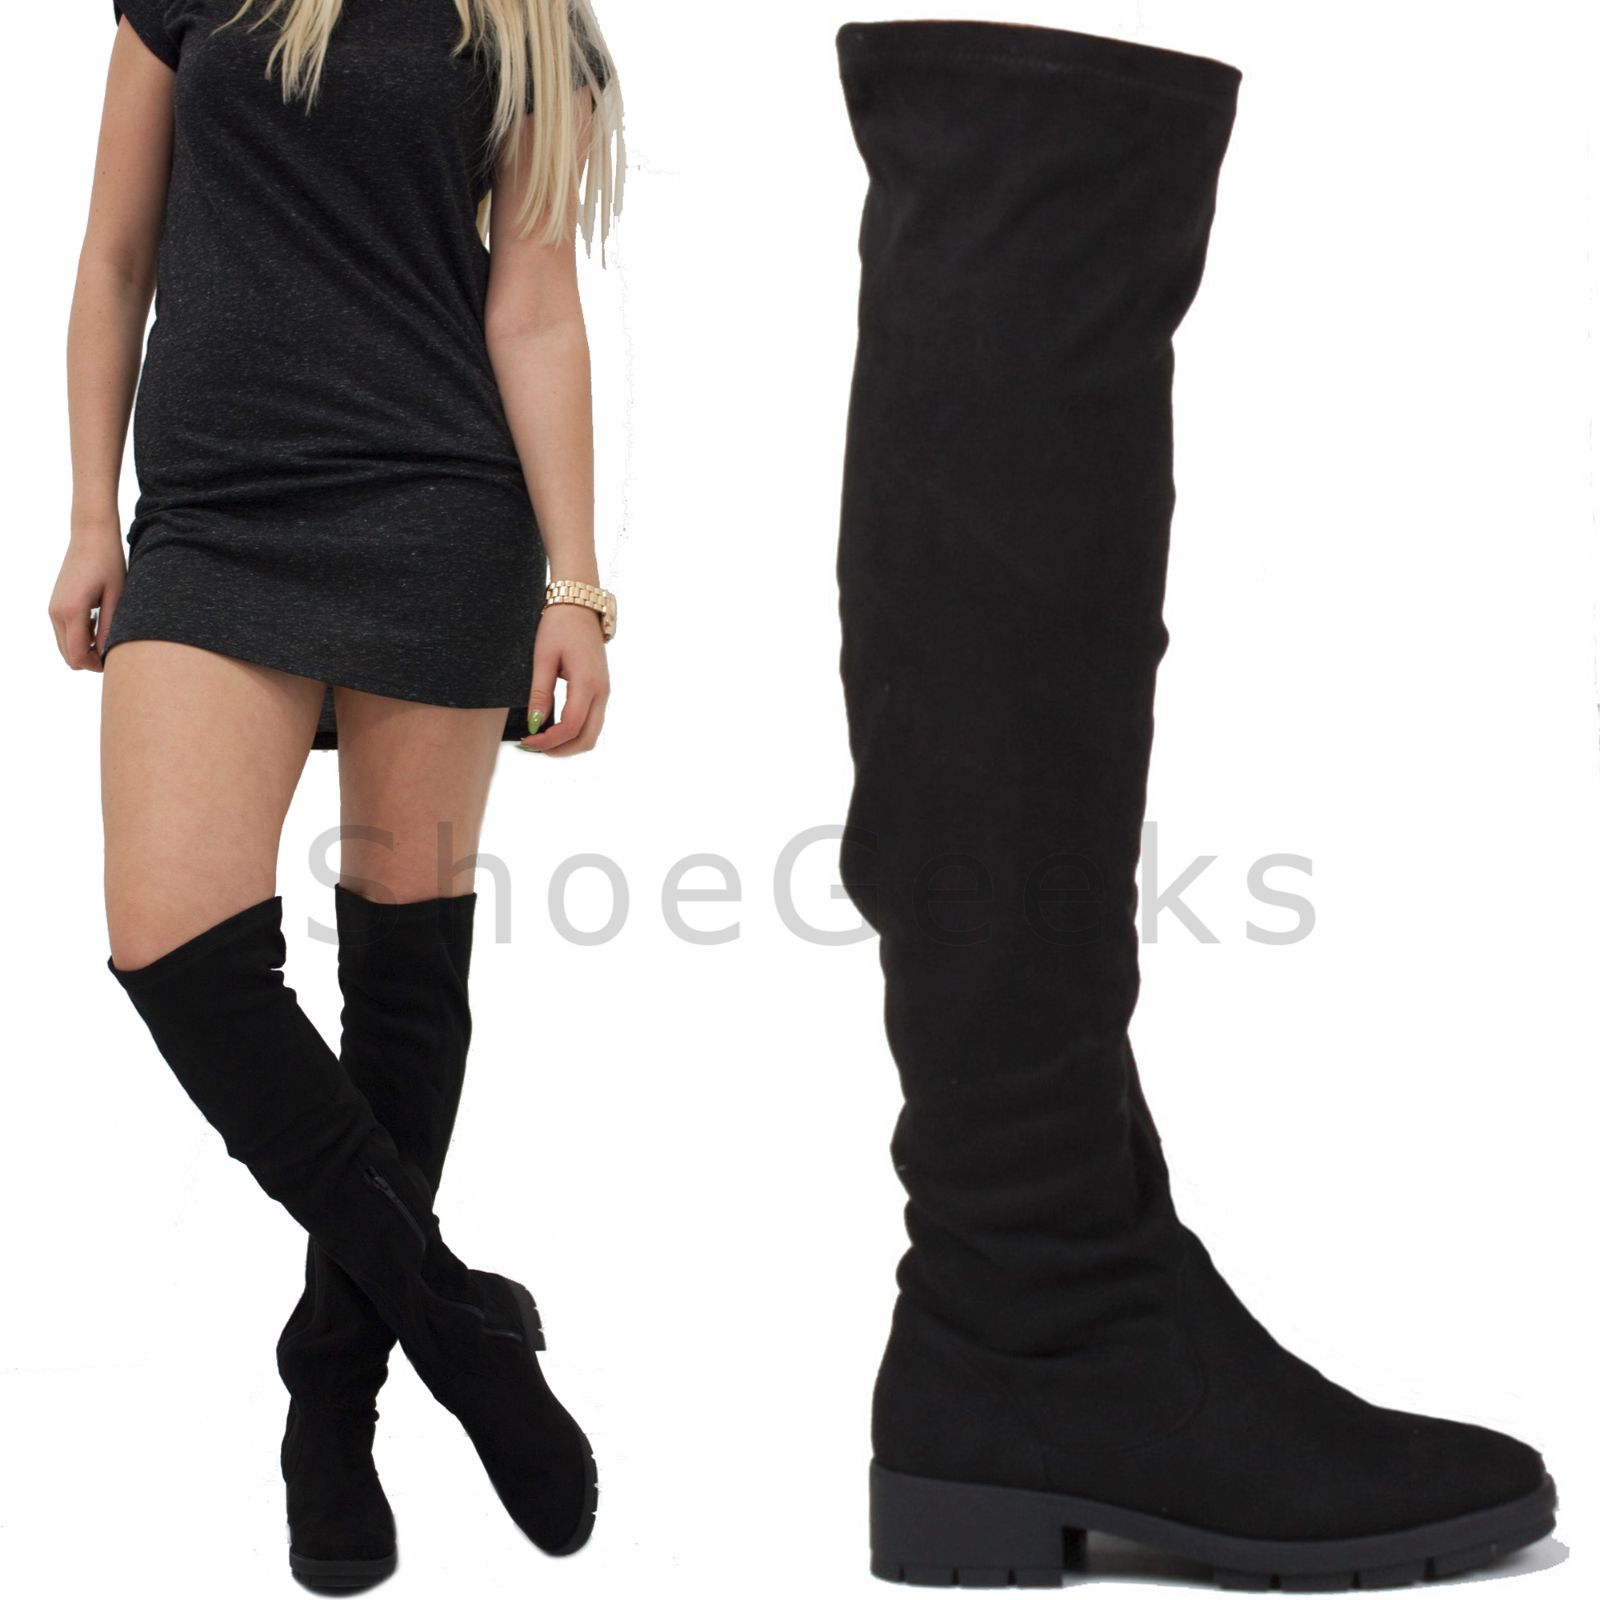 WOMENS LADIES FLAT LOW HEEL OVER THE KNEE HIGH STRETCH BLACK SUEDE BOOTS SIZE